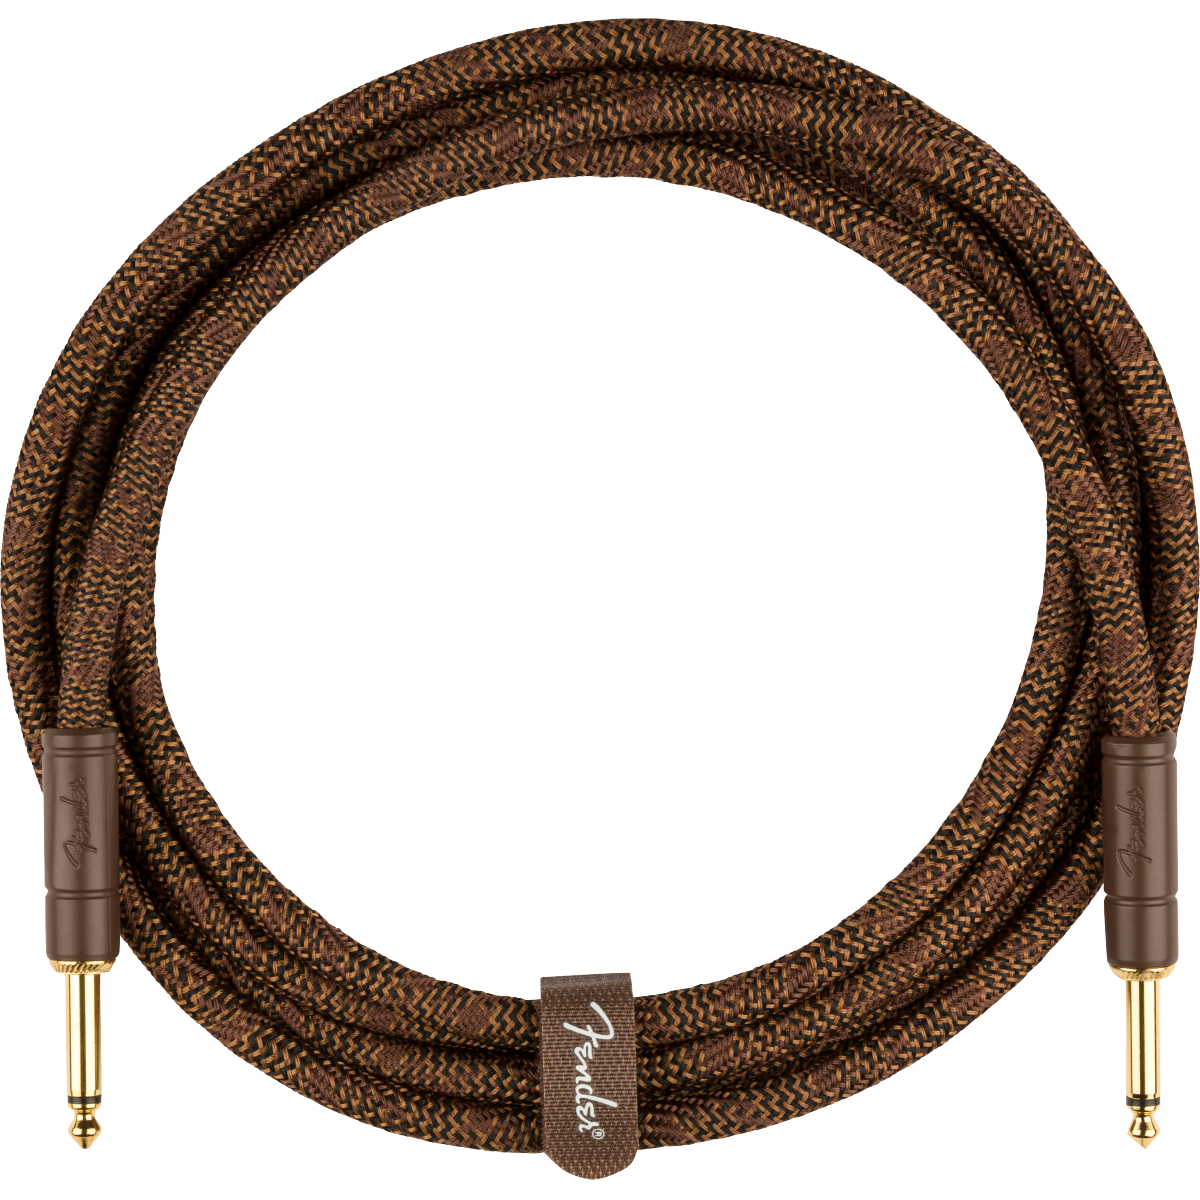 Image 1 of Fender Paramount Acoustic Instrument Cable, 10'- SKU# PCBL10 : Product Type Cables & Accessories : Elderly Instruments